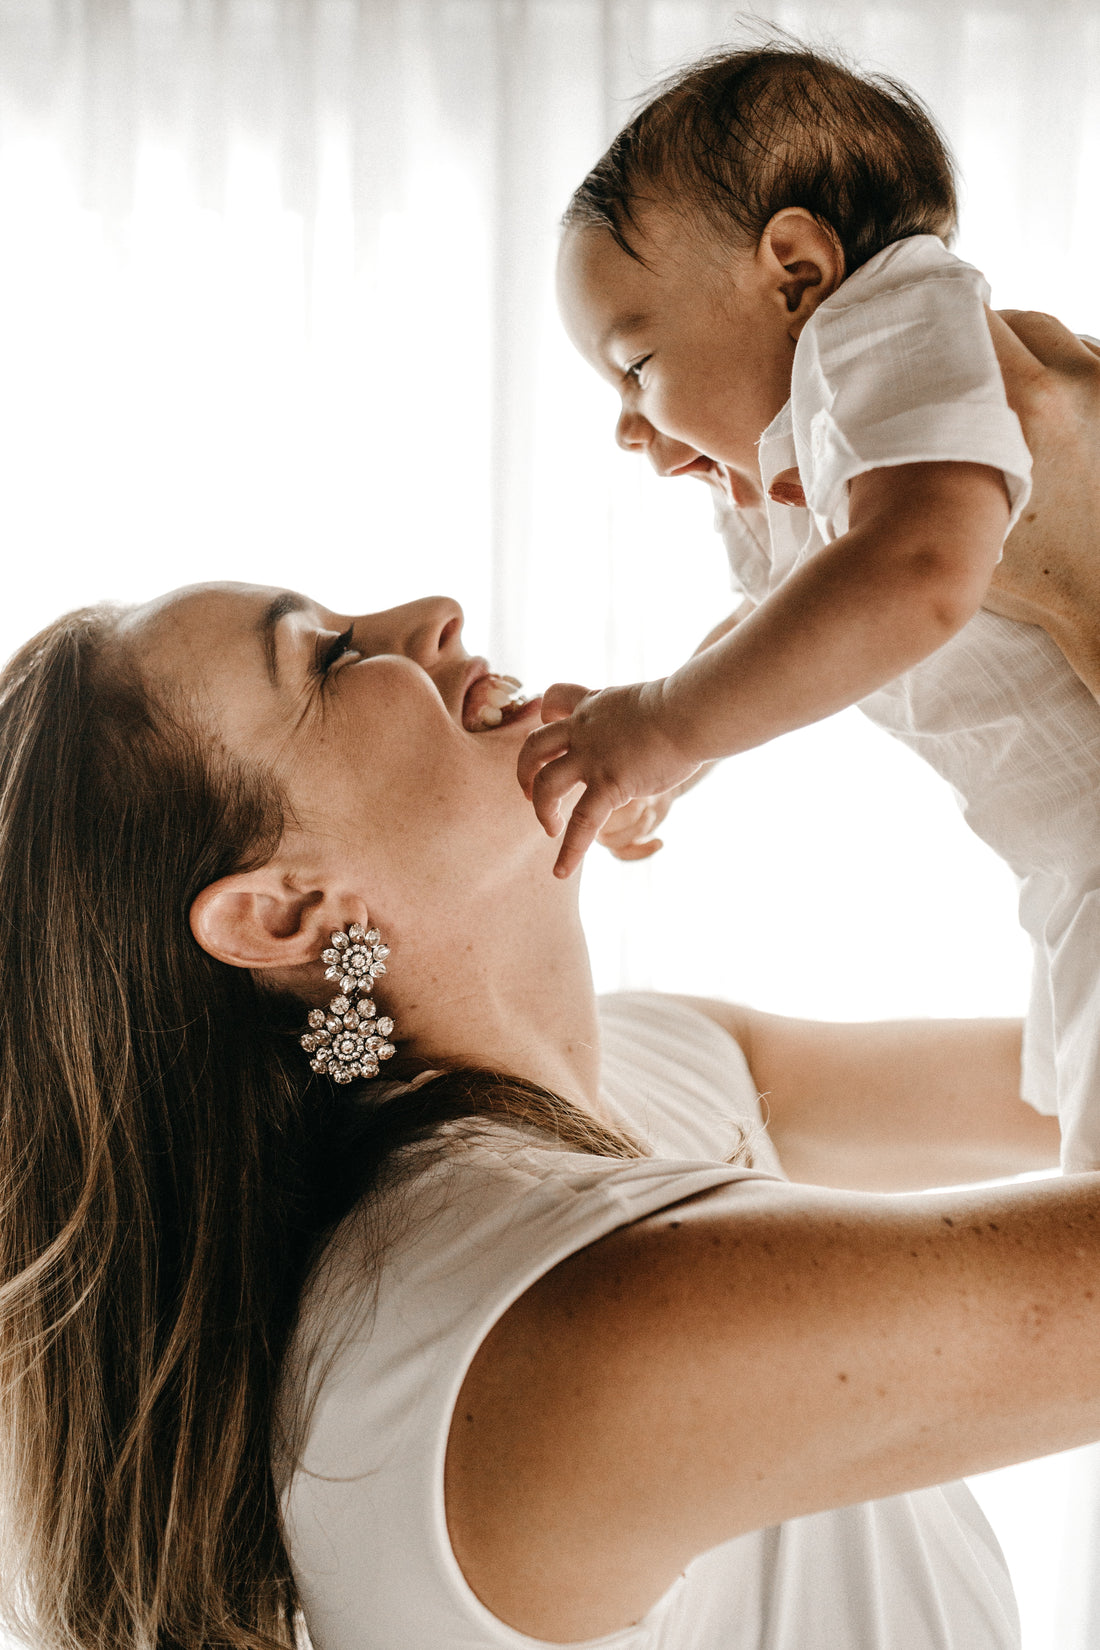 Skincare Tips for Busy Moms